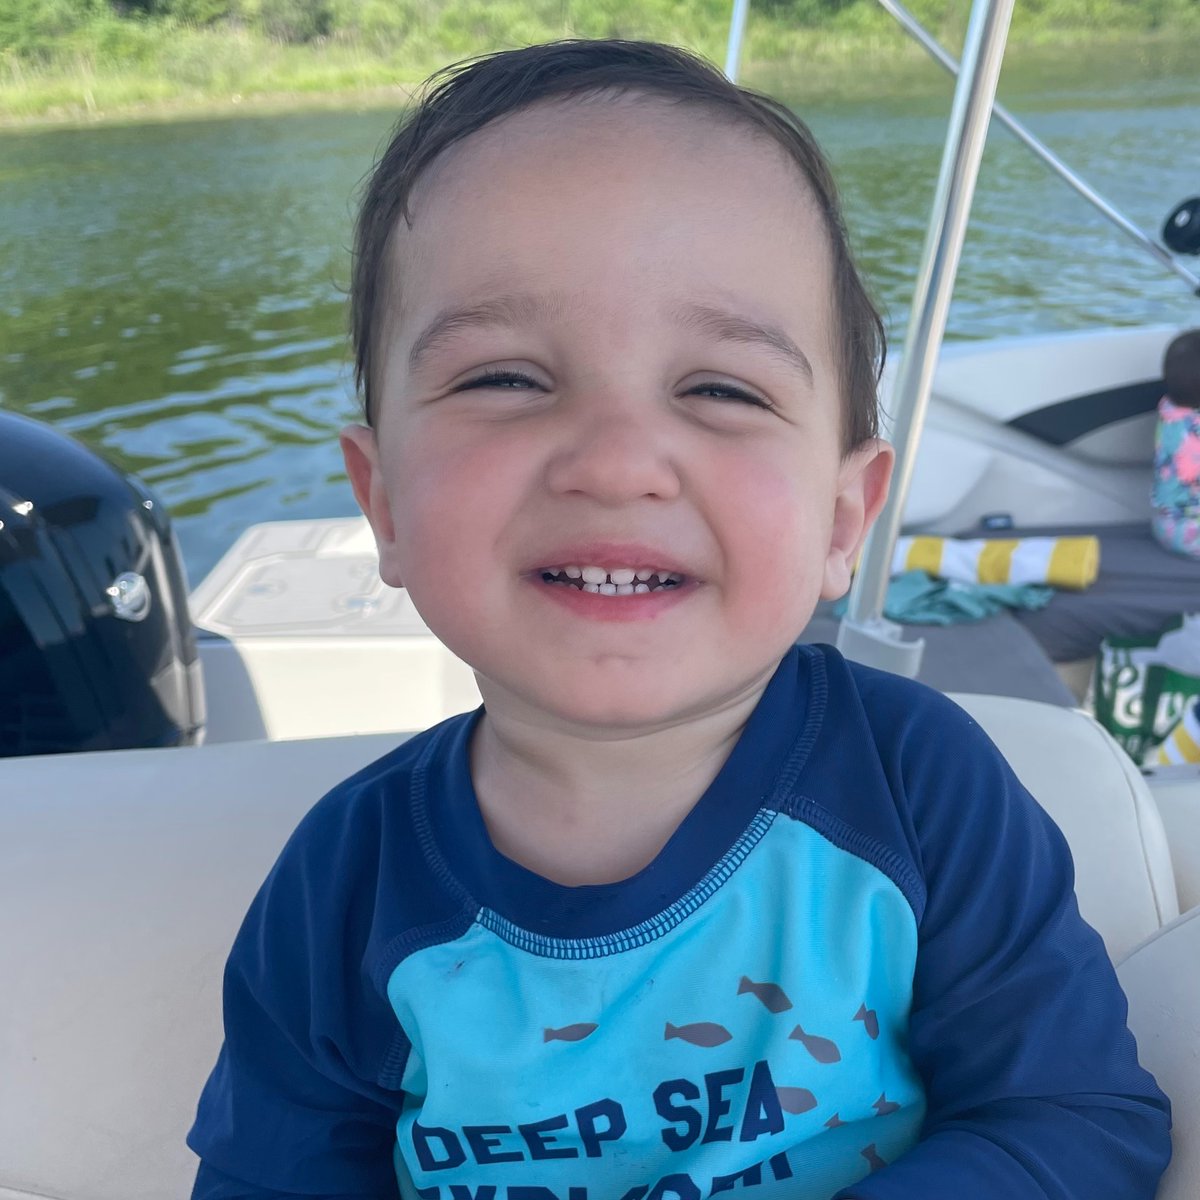 Meet Elliott, one our #LittleVictors from our 2023 calendar. Elliott was transferred to Mott four weeks after birth when he contracted meningitis (late onset GBS). The Mott team saved his life! Hail to Elliott and all our Little Victors! Learn more at mottchildren.org/calendar.